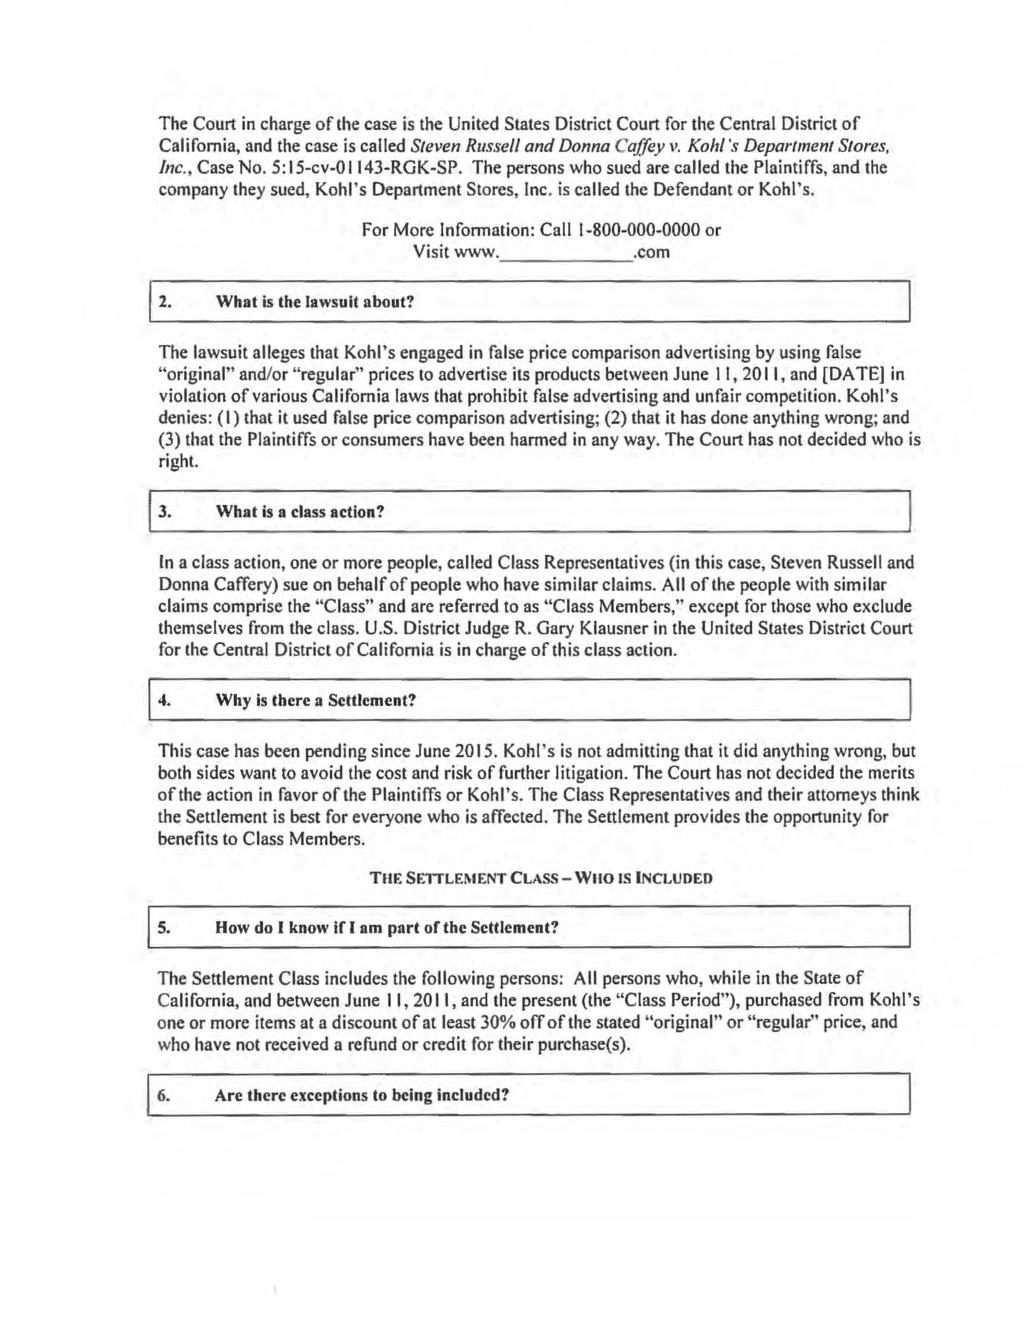 Case 5:15-cv-01143-RGK-SP Document 63-3 Filed 03/14/16 Page 44 of 59 Page ID #:813 The Court in charge of the case is the United States District Court for the Central District of California, and the